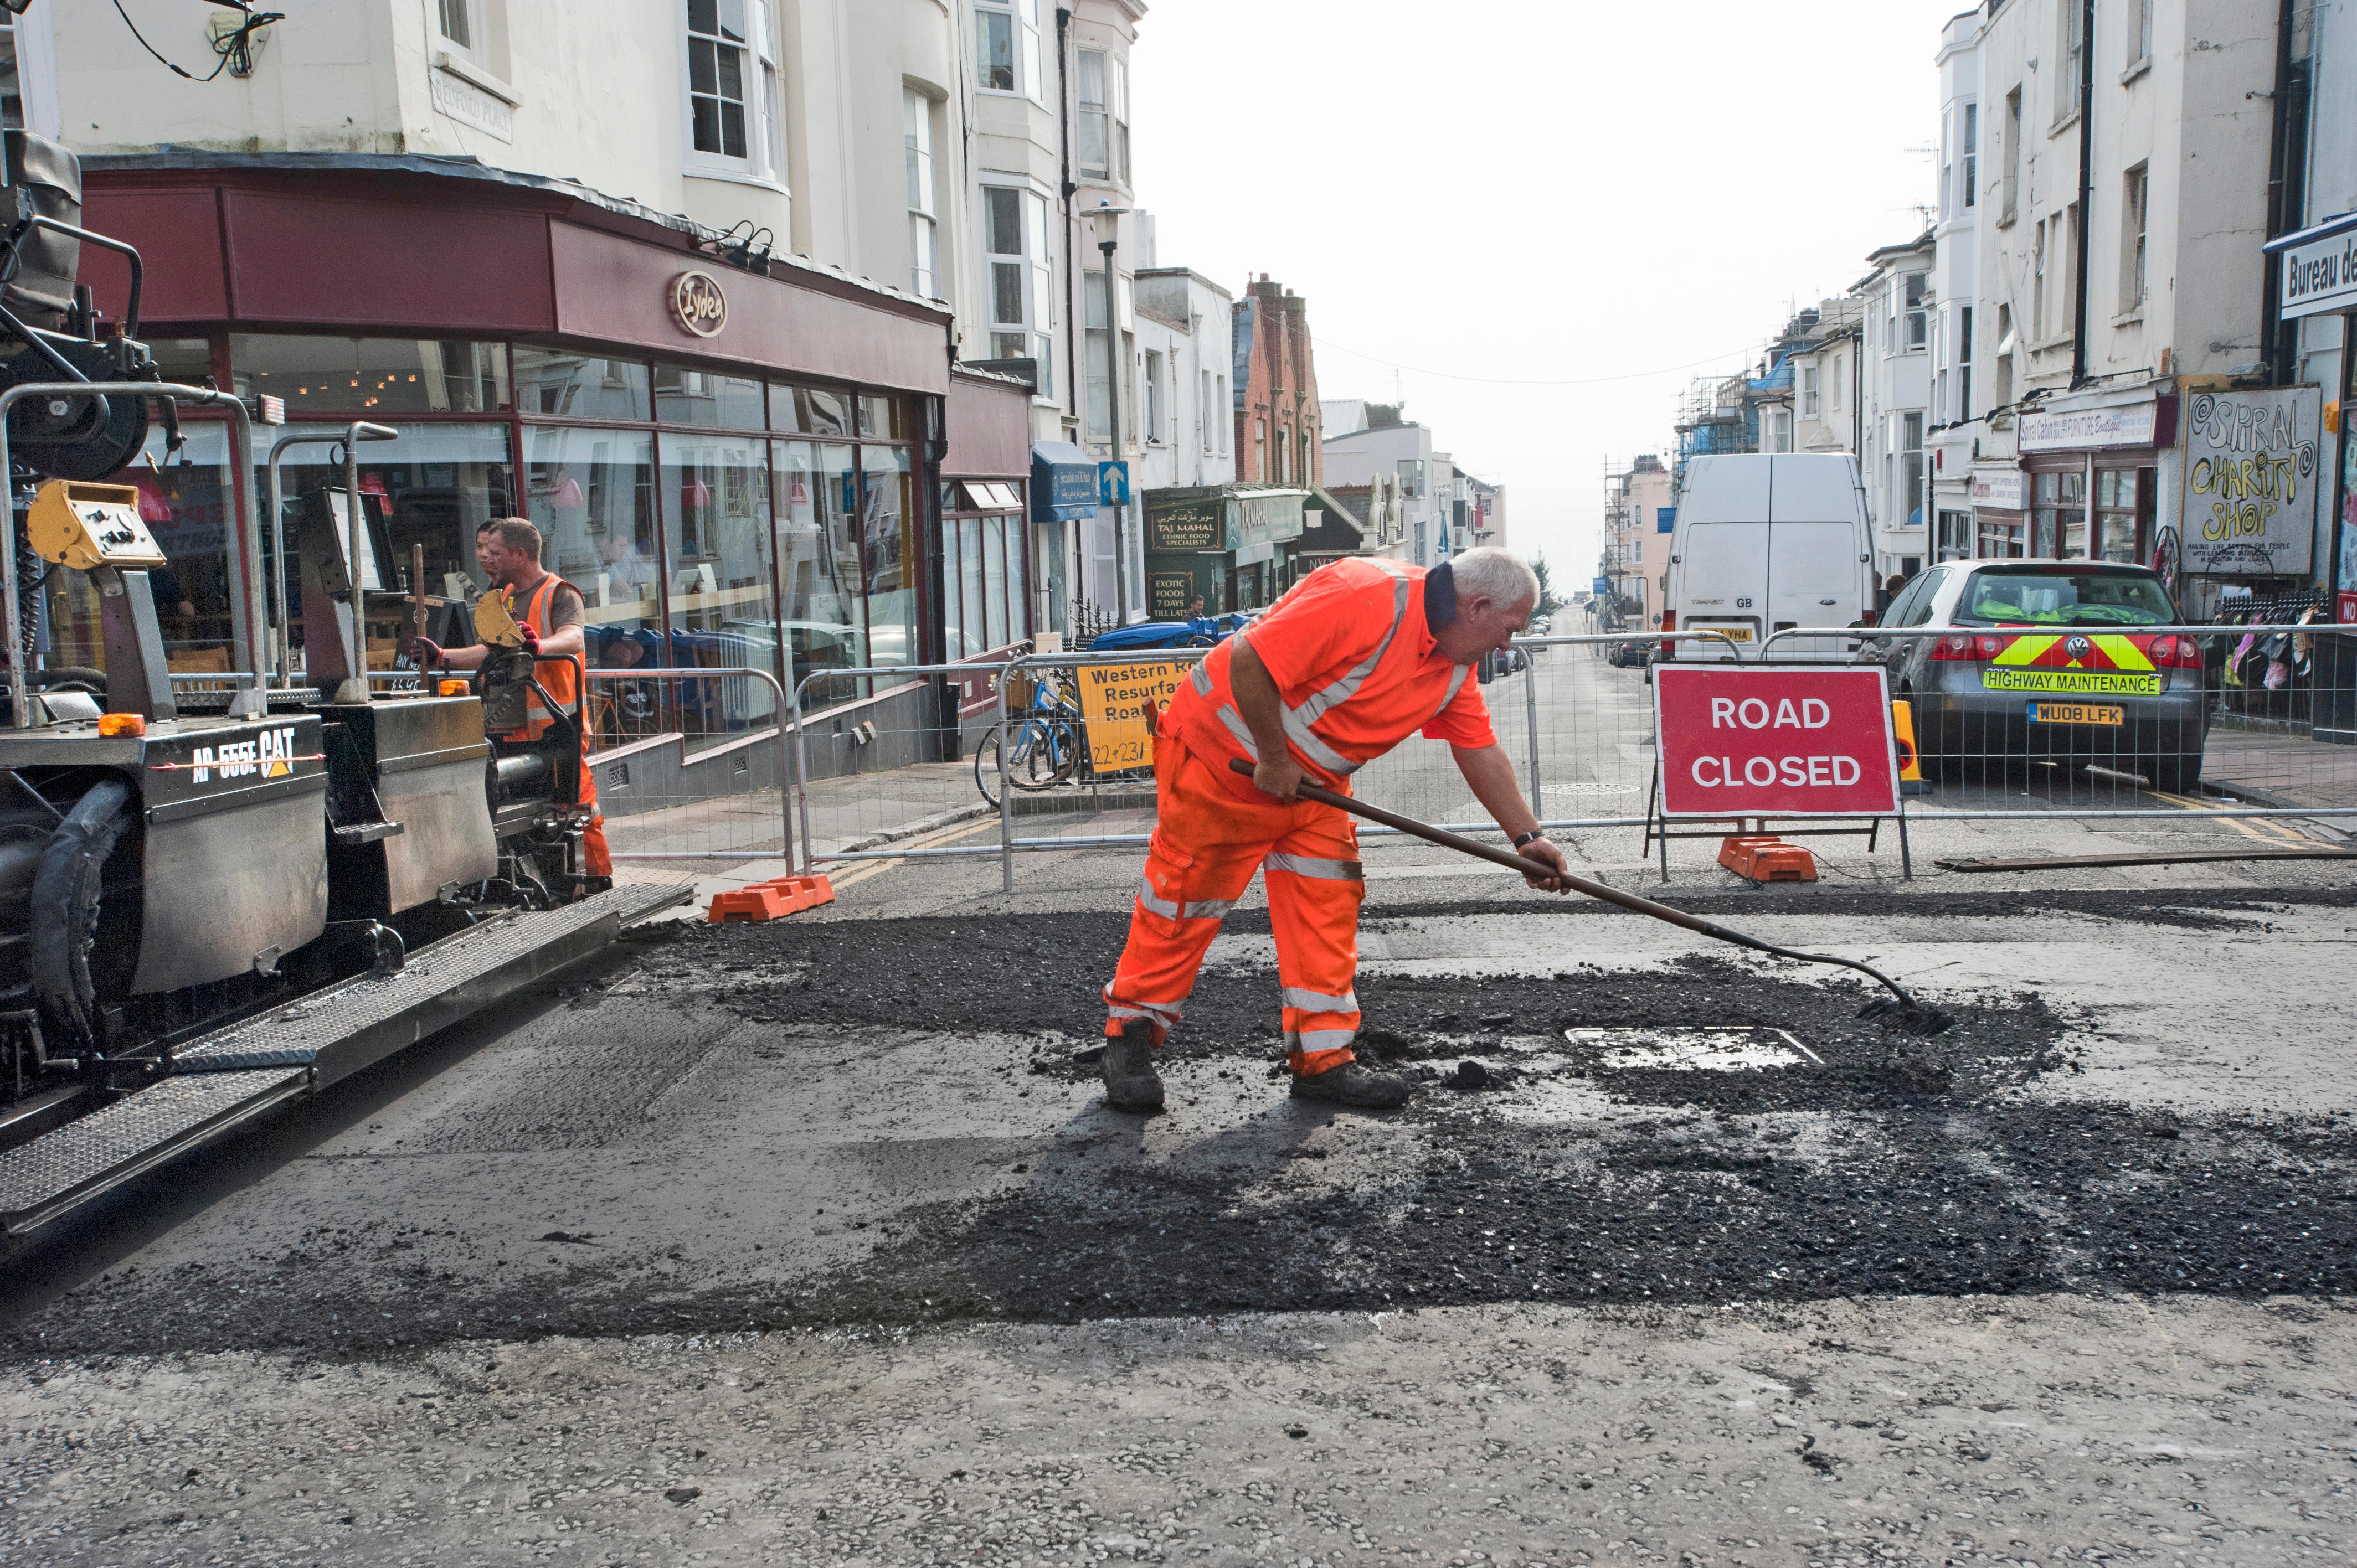 A road maintenance worker repairs a pothole in a road in Brighton